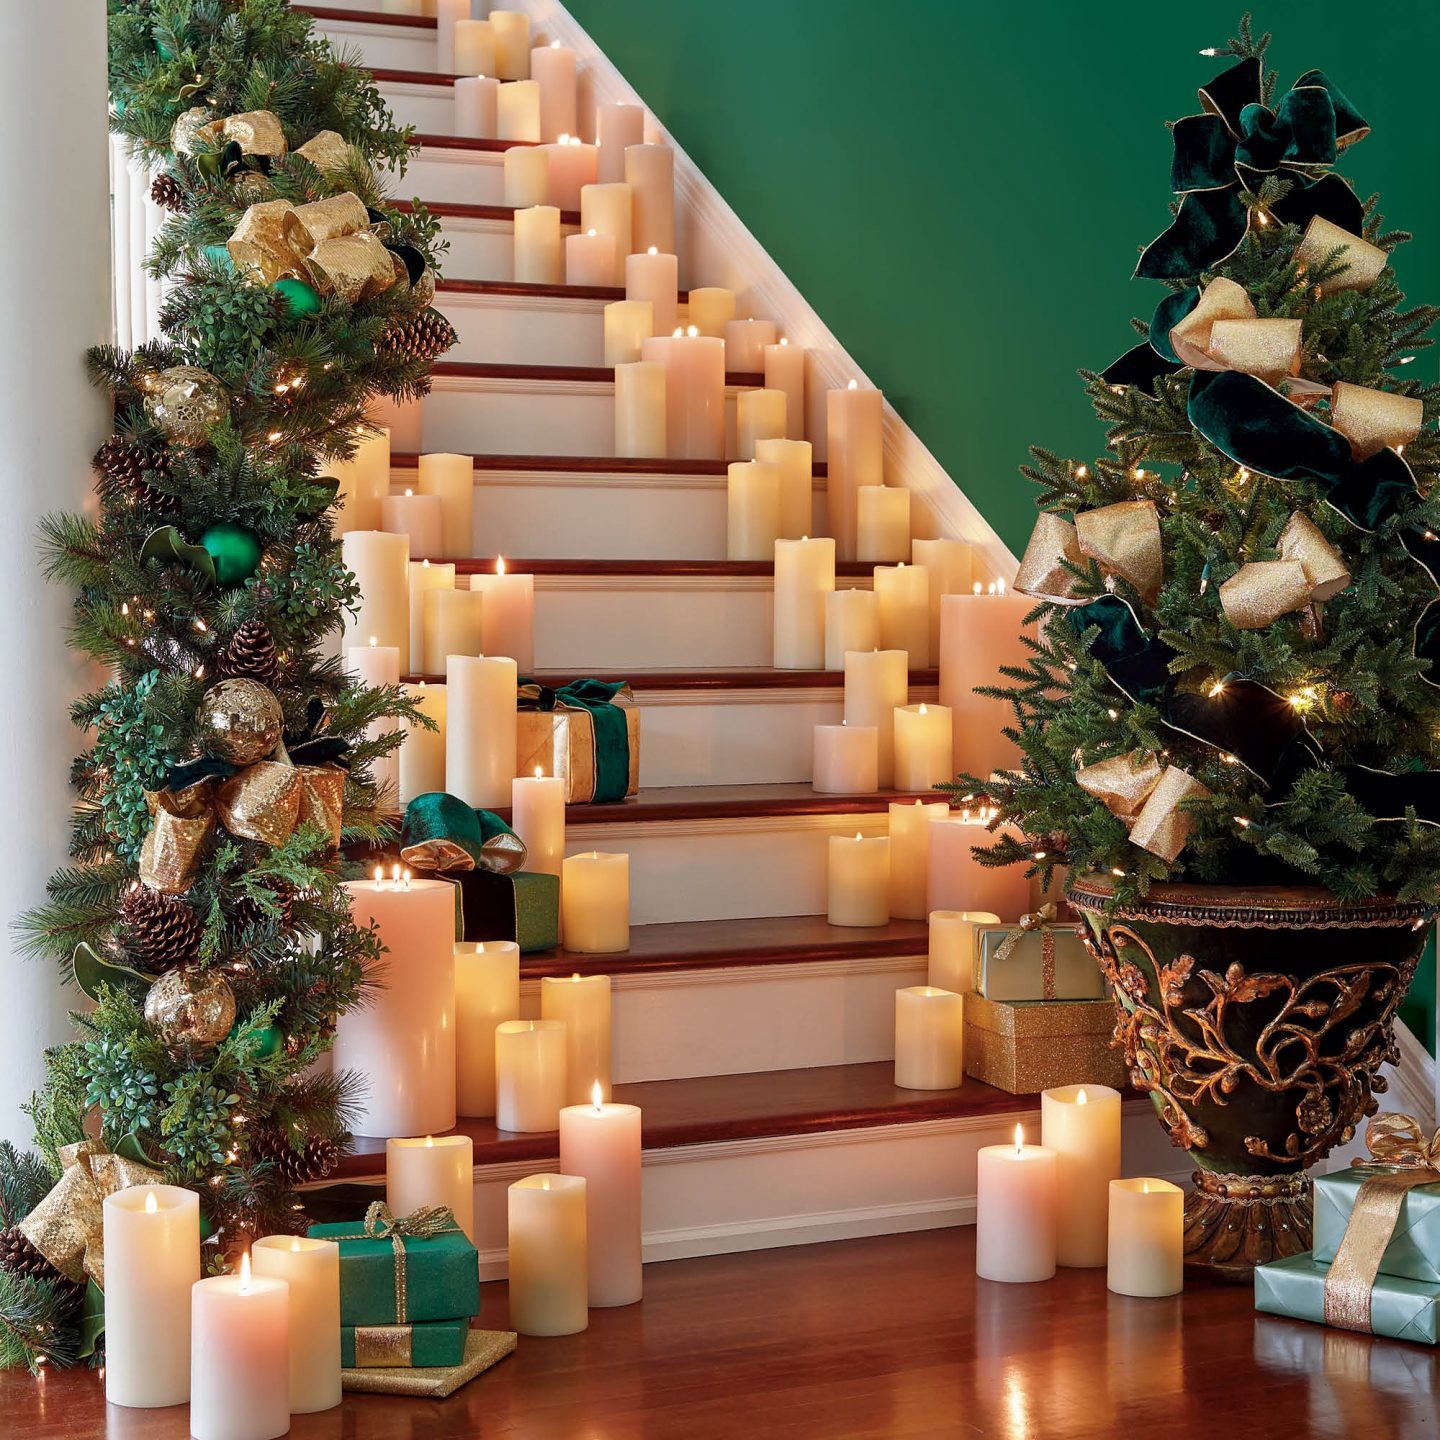 Green and Gold Holiday Decor We Love!